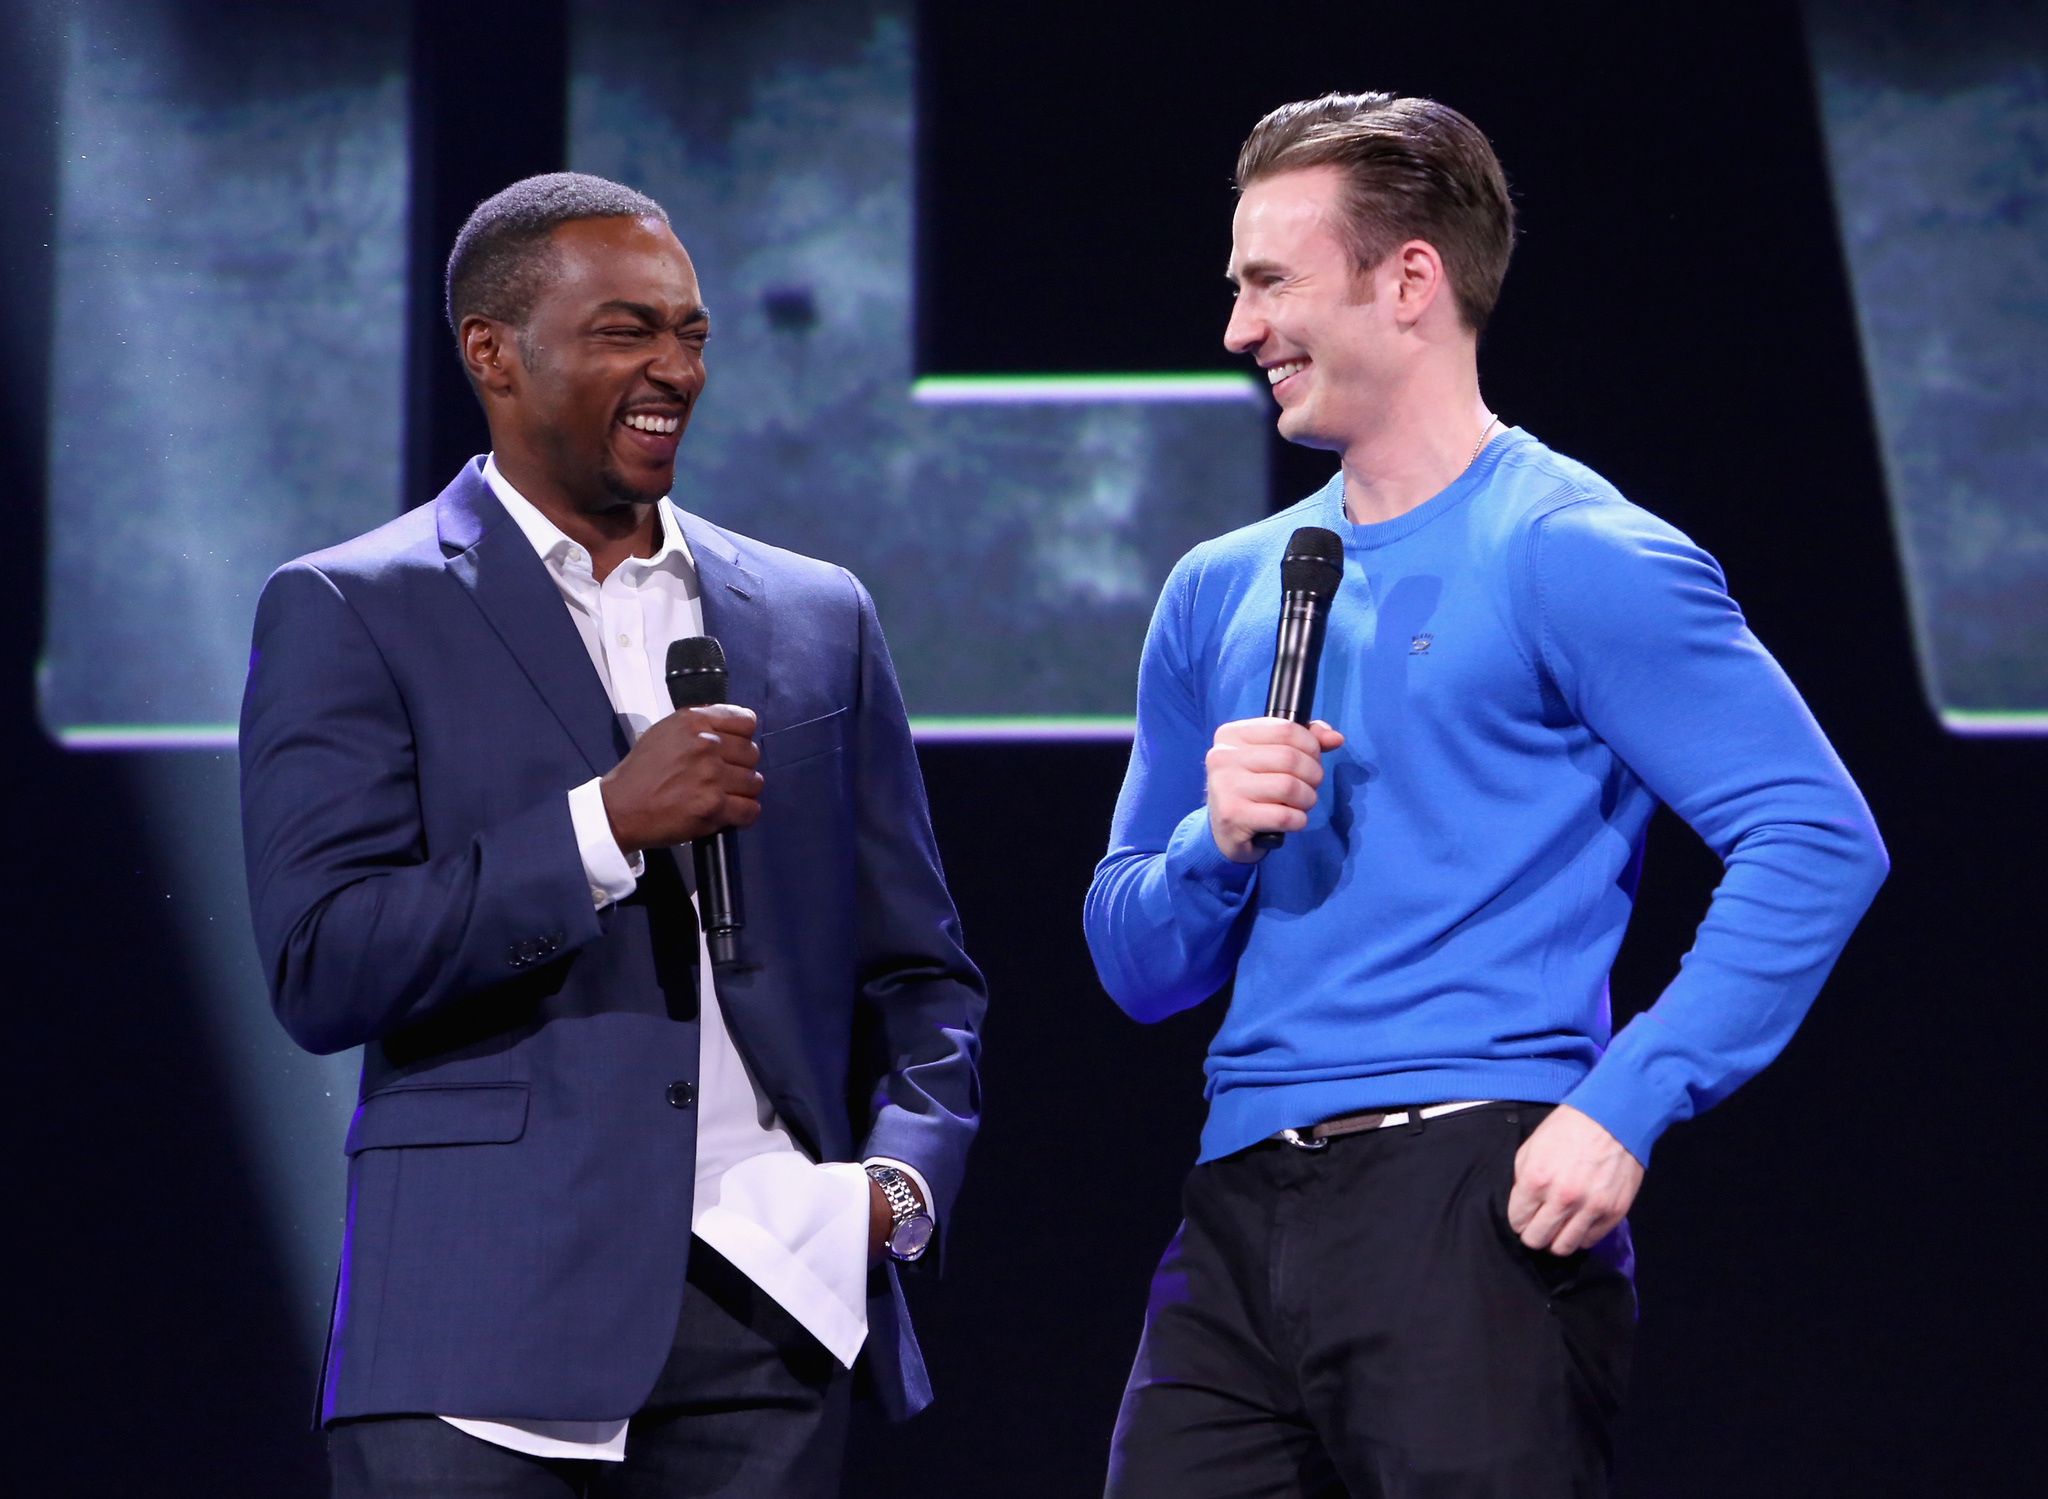 Chris Evans and Anthony Mackie at event of Captain America: Civil War (2016)